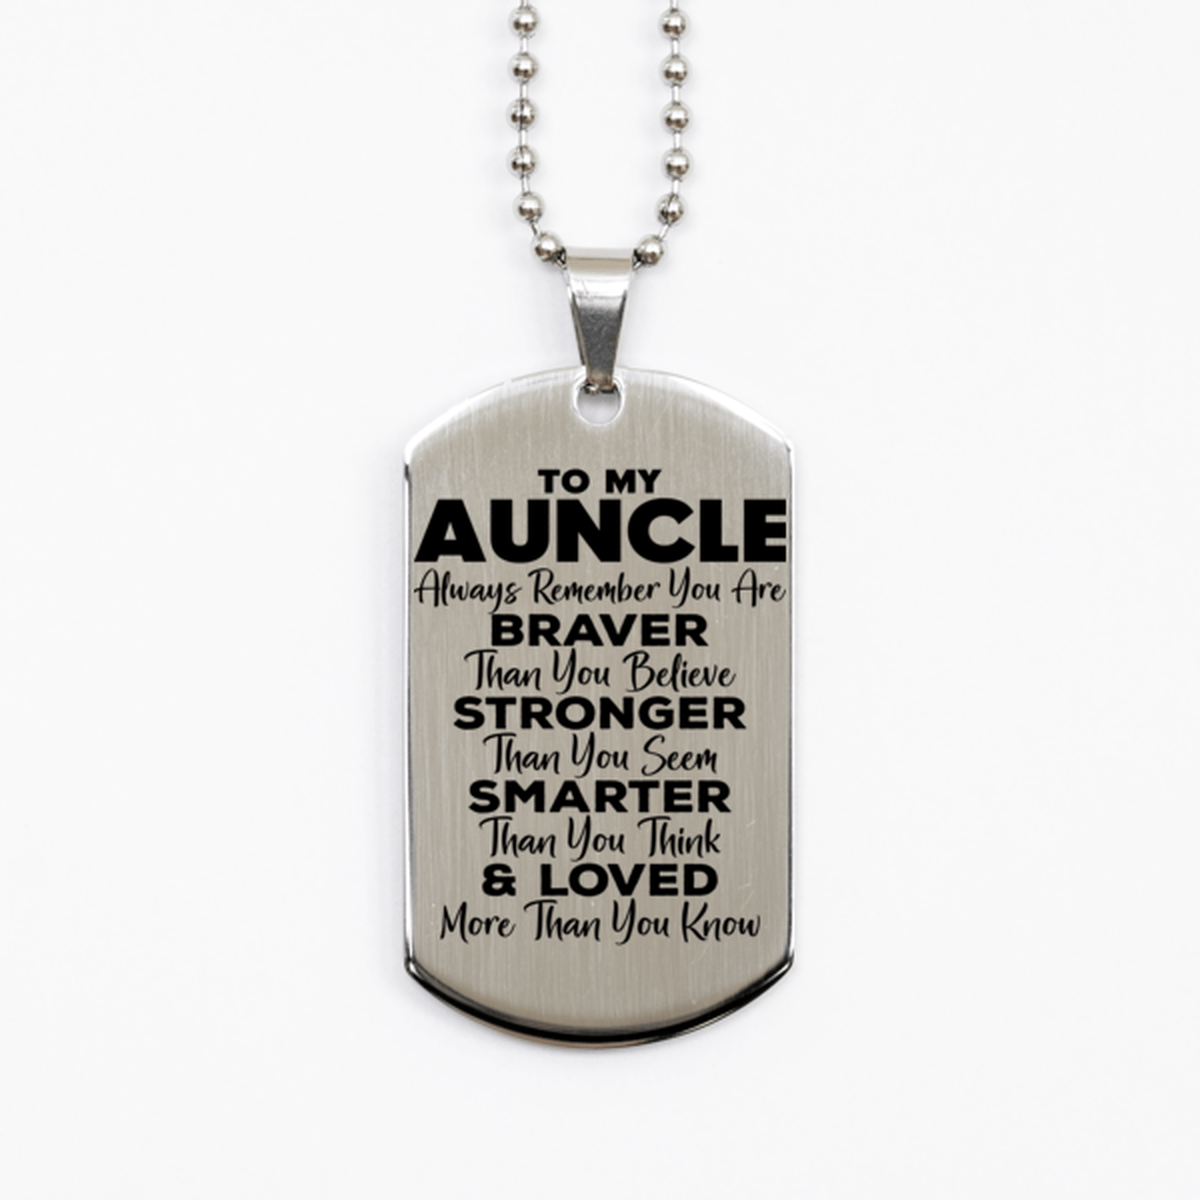 Motivational Auncle Silver Dog Tag Necklace, Auncle Always Remember You Are Braver Than You Believe, Best Birthday Gifts for Auncle